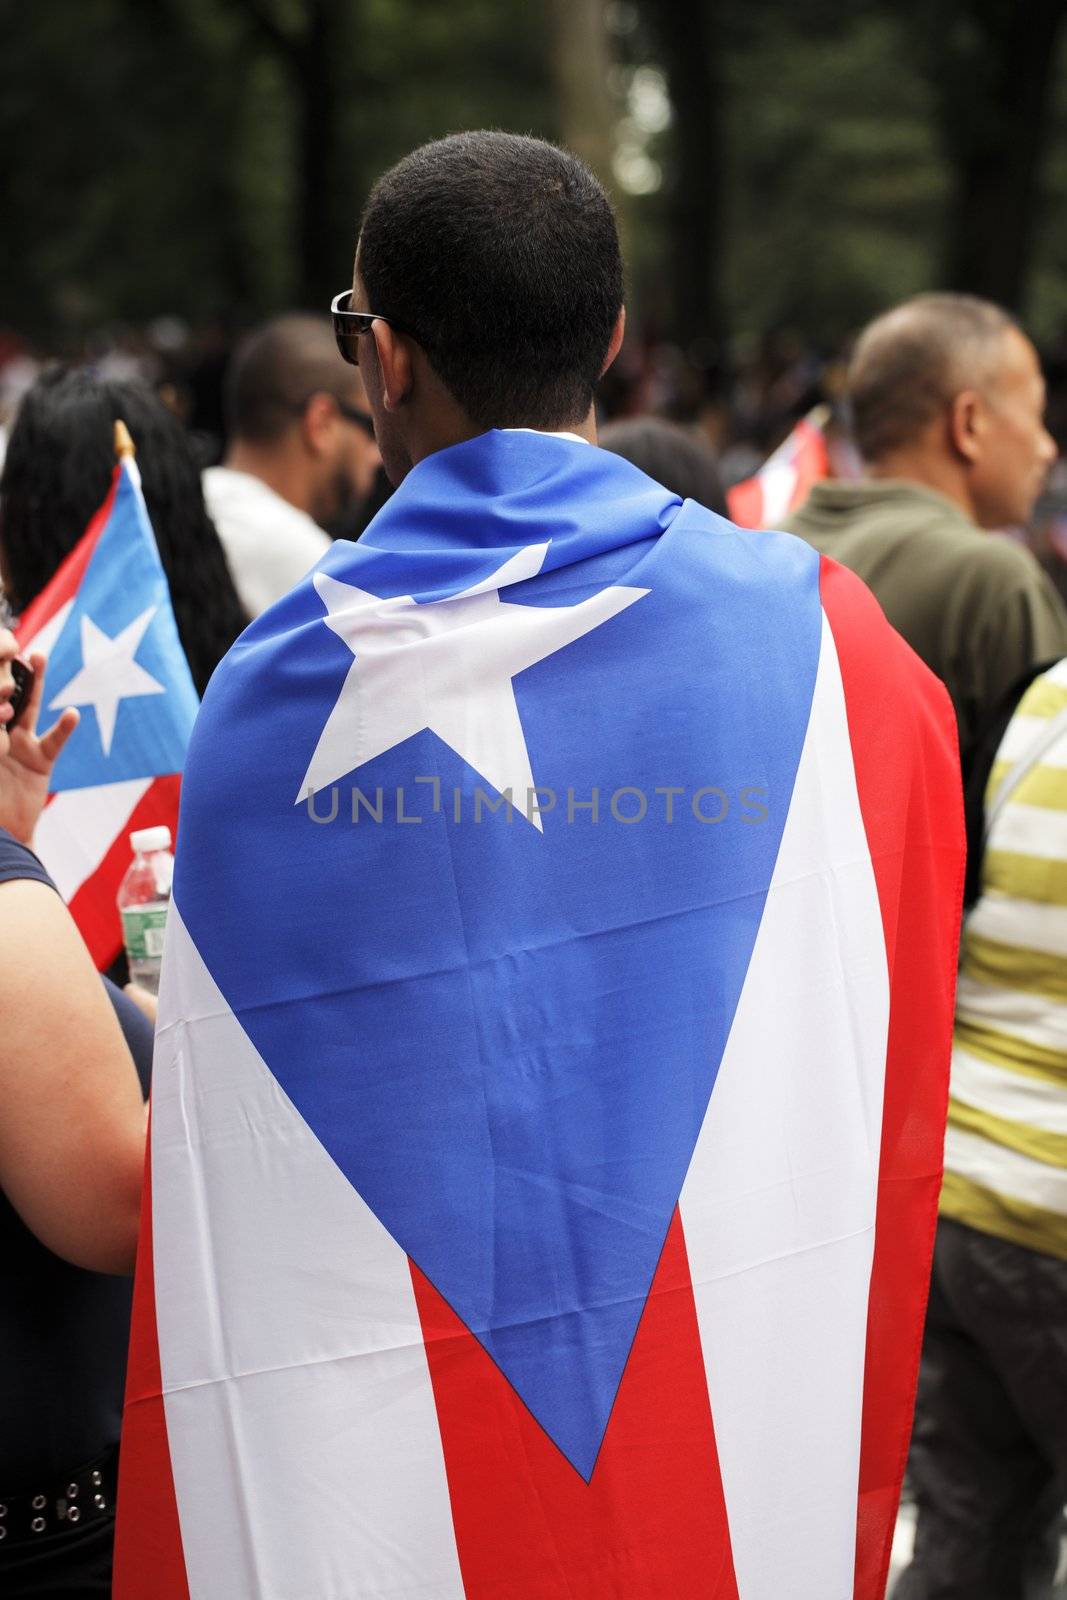 NEW YORK CITY, USA - JUNE 10: The annual Puerto Rican Day Parade in NYC honoring the inhabitants of Puerto Rico and all people of Puerto Rican birth or heritage. June 10, 2012 in New York City, USA